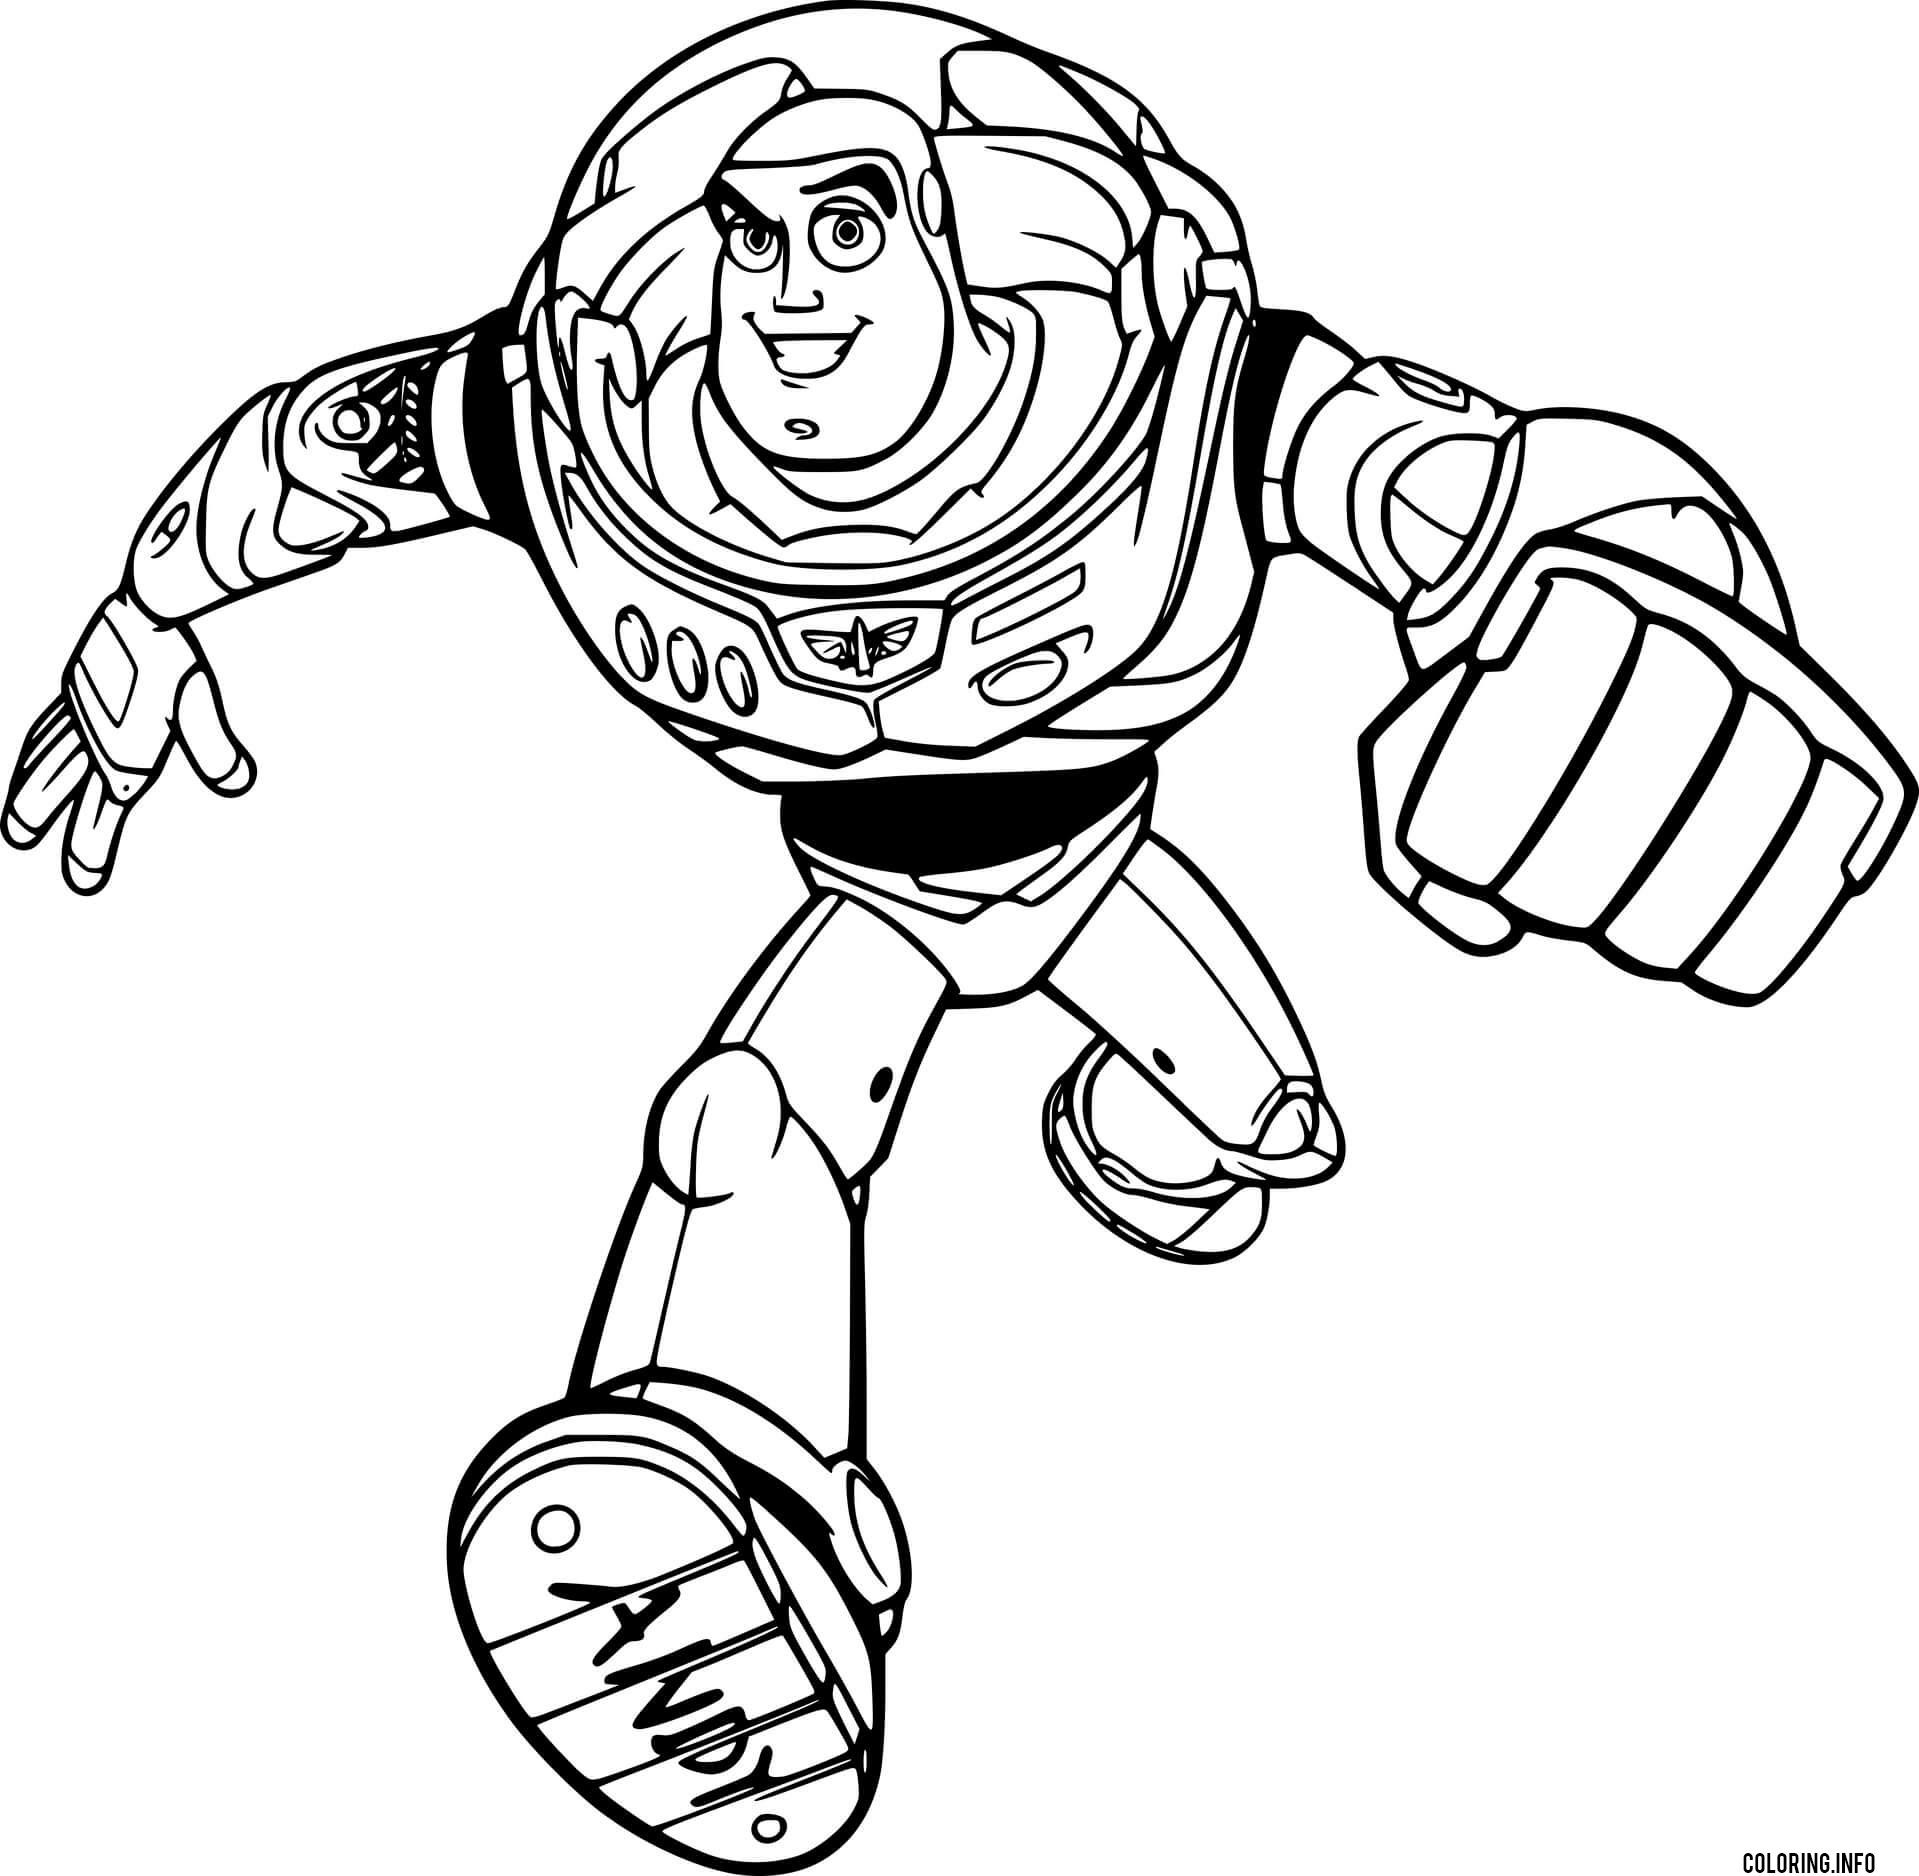 Buzz Lightyear Running Fast coloring